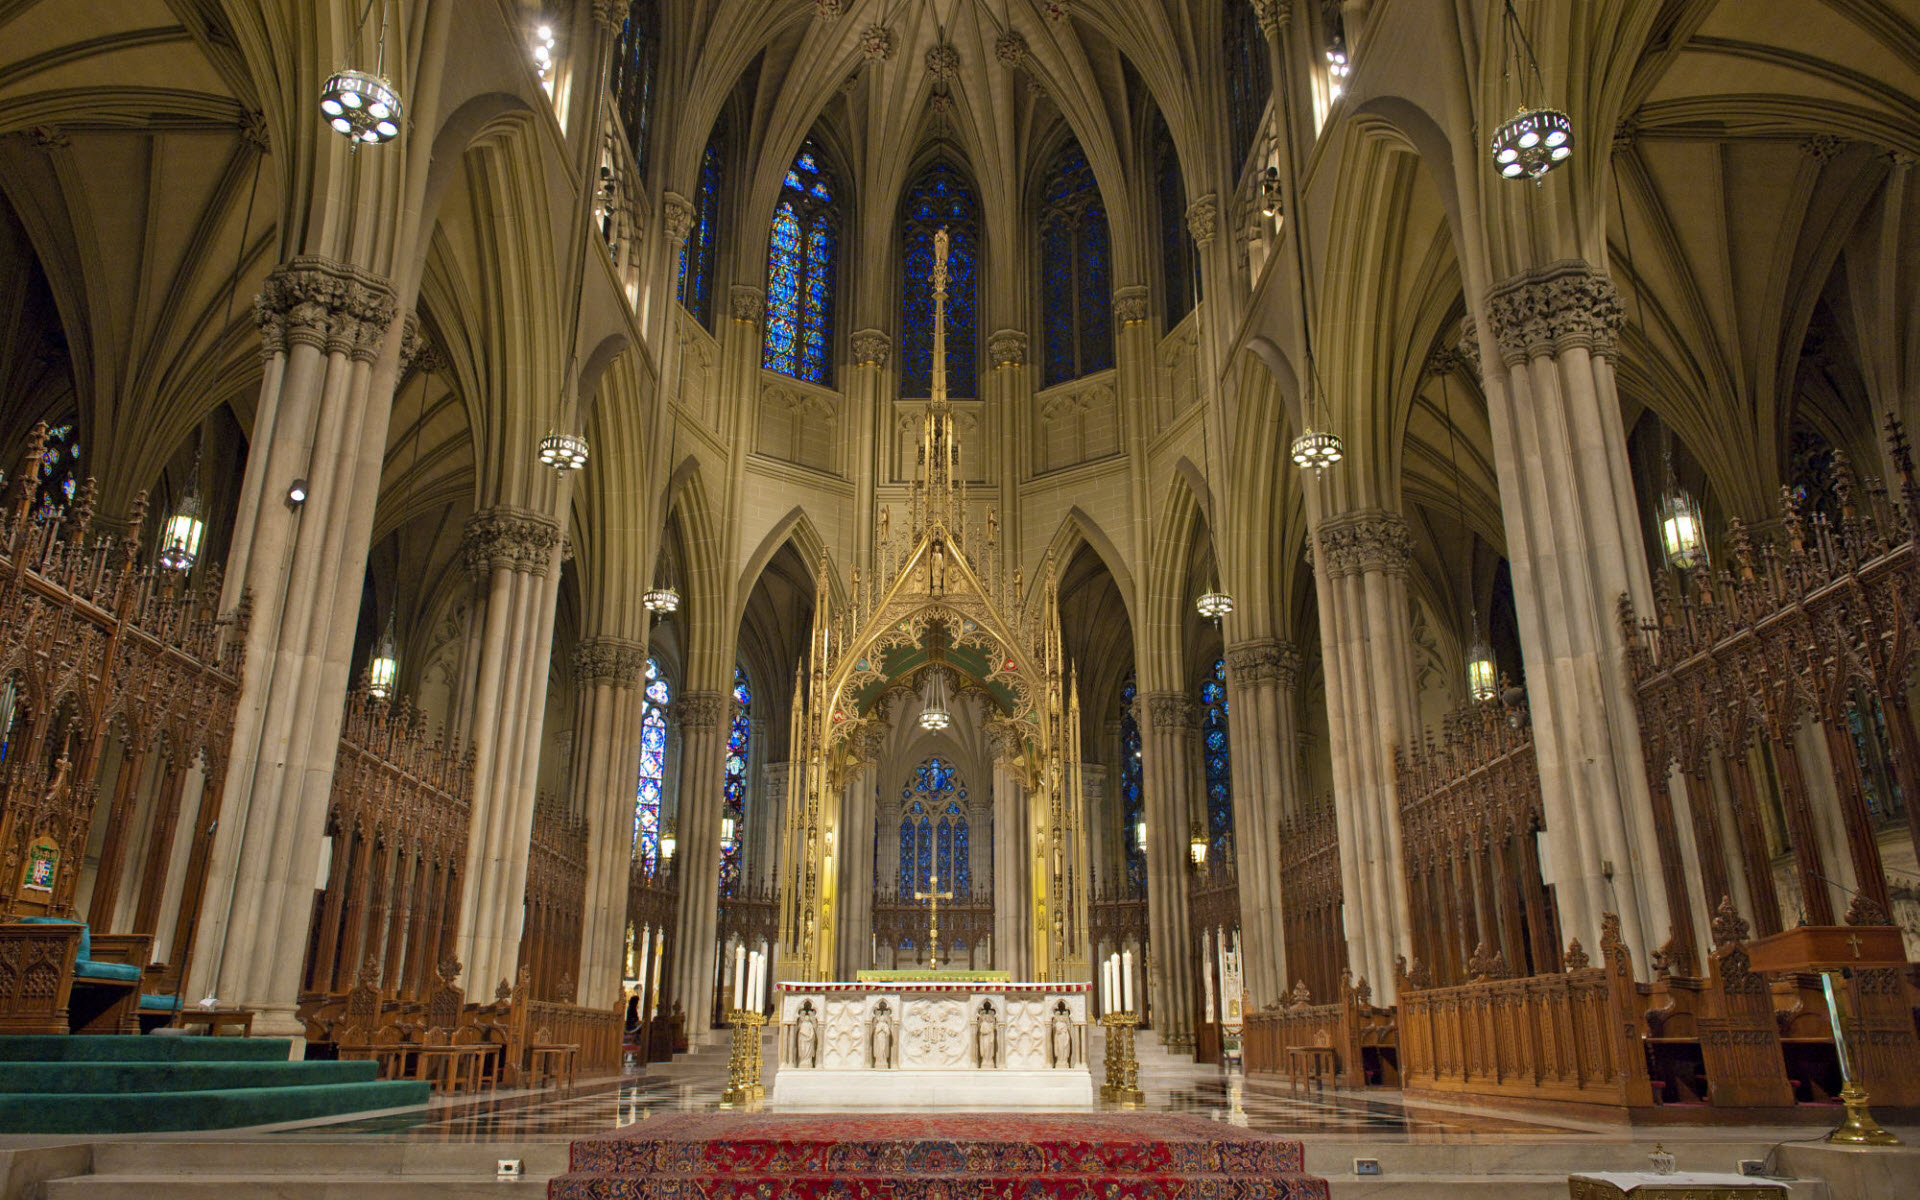 Check out these 50 beautiful photos of St. Patrick's Cathedral in New York City.